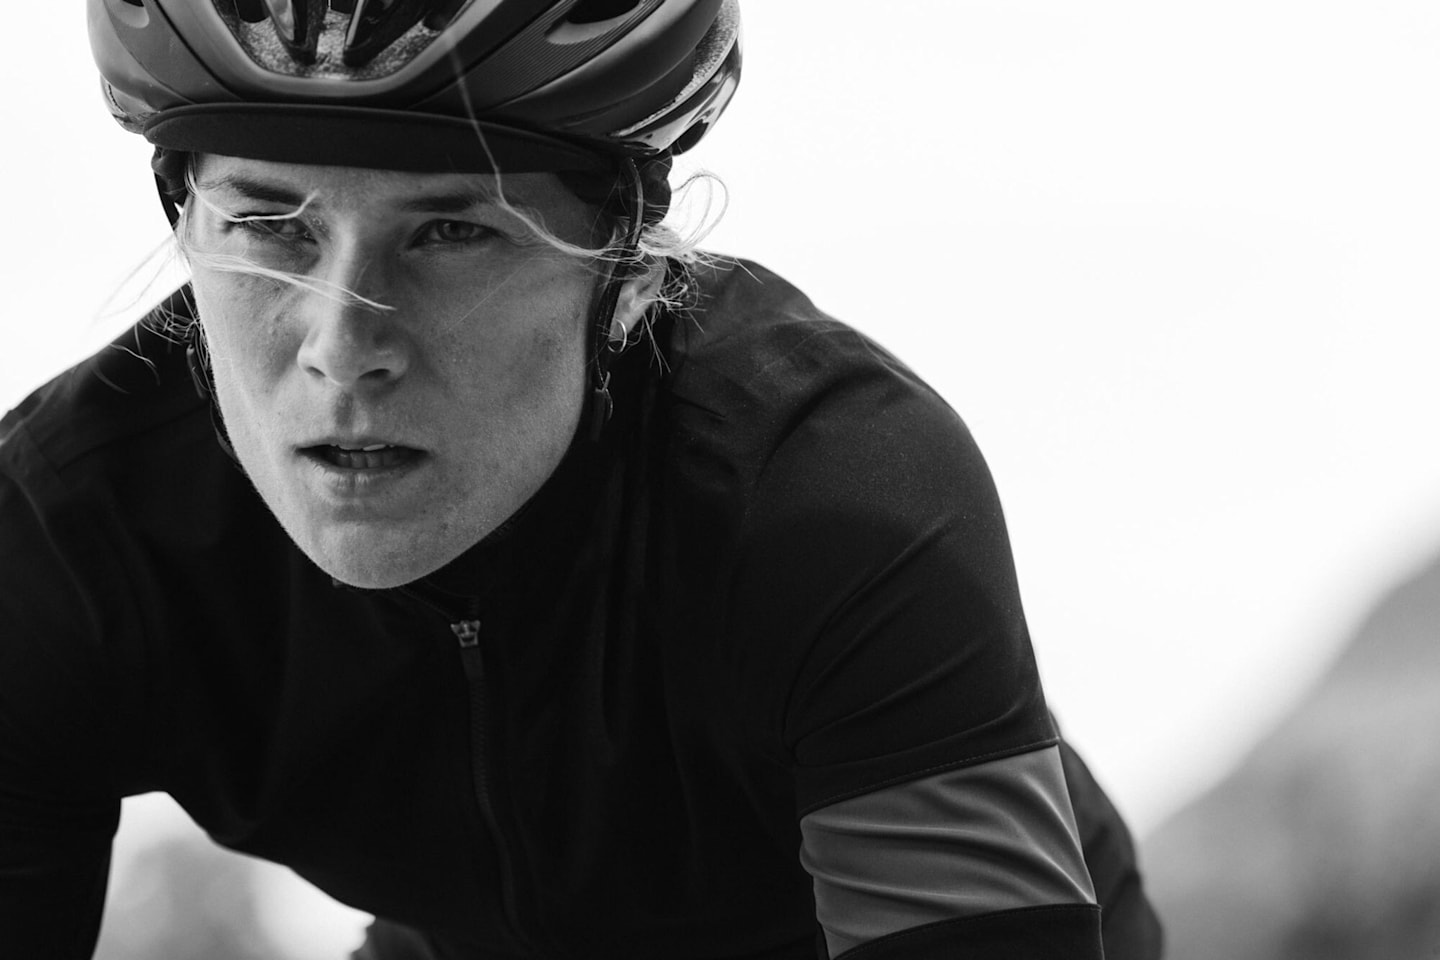 The Worlds Finest Cycling Clothing and Accessories